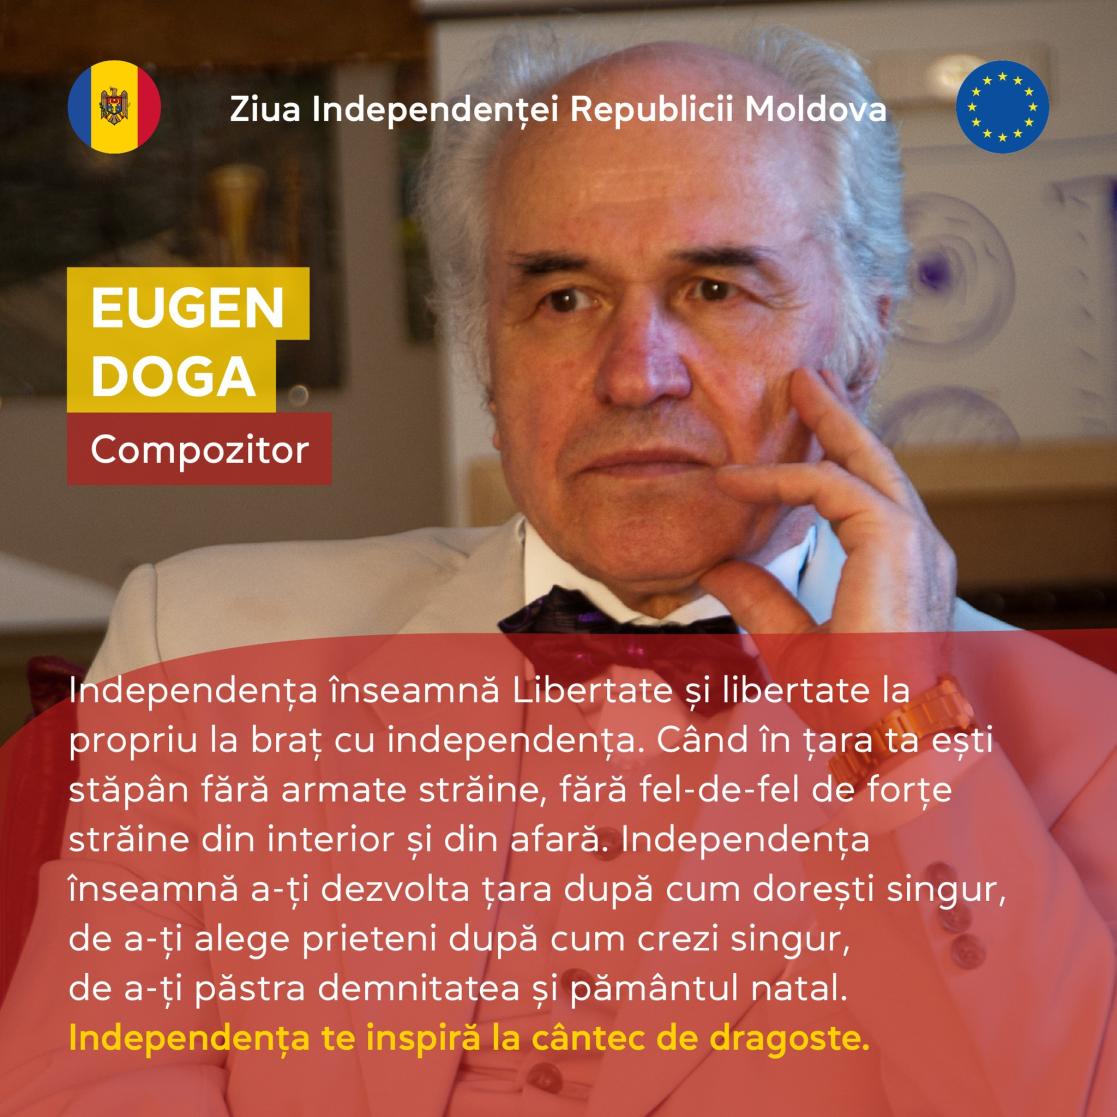 Quotation from a person named Eugen Doga